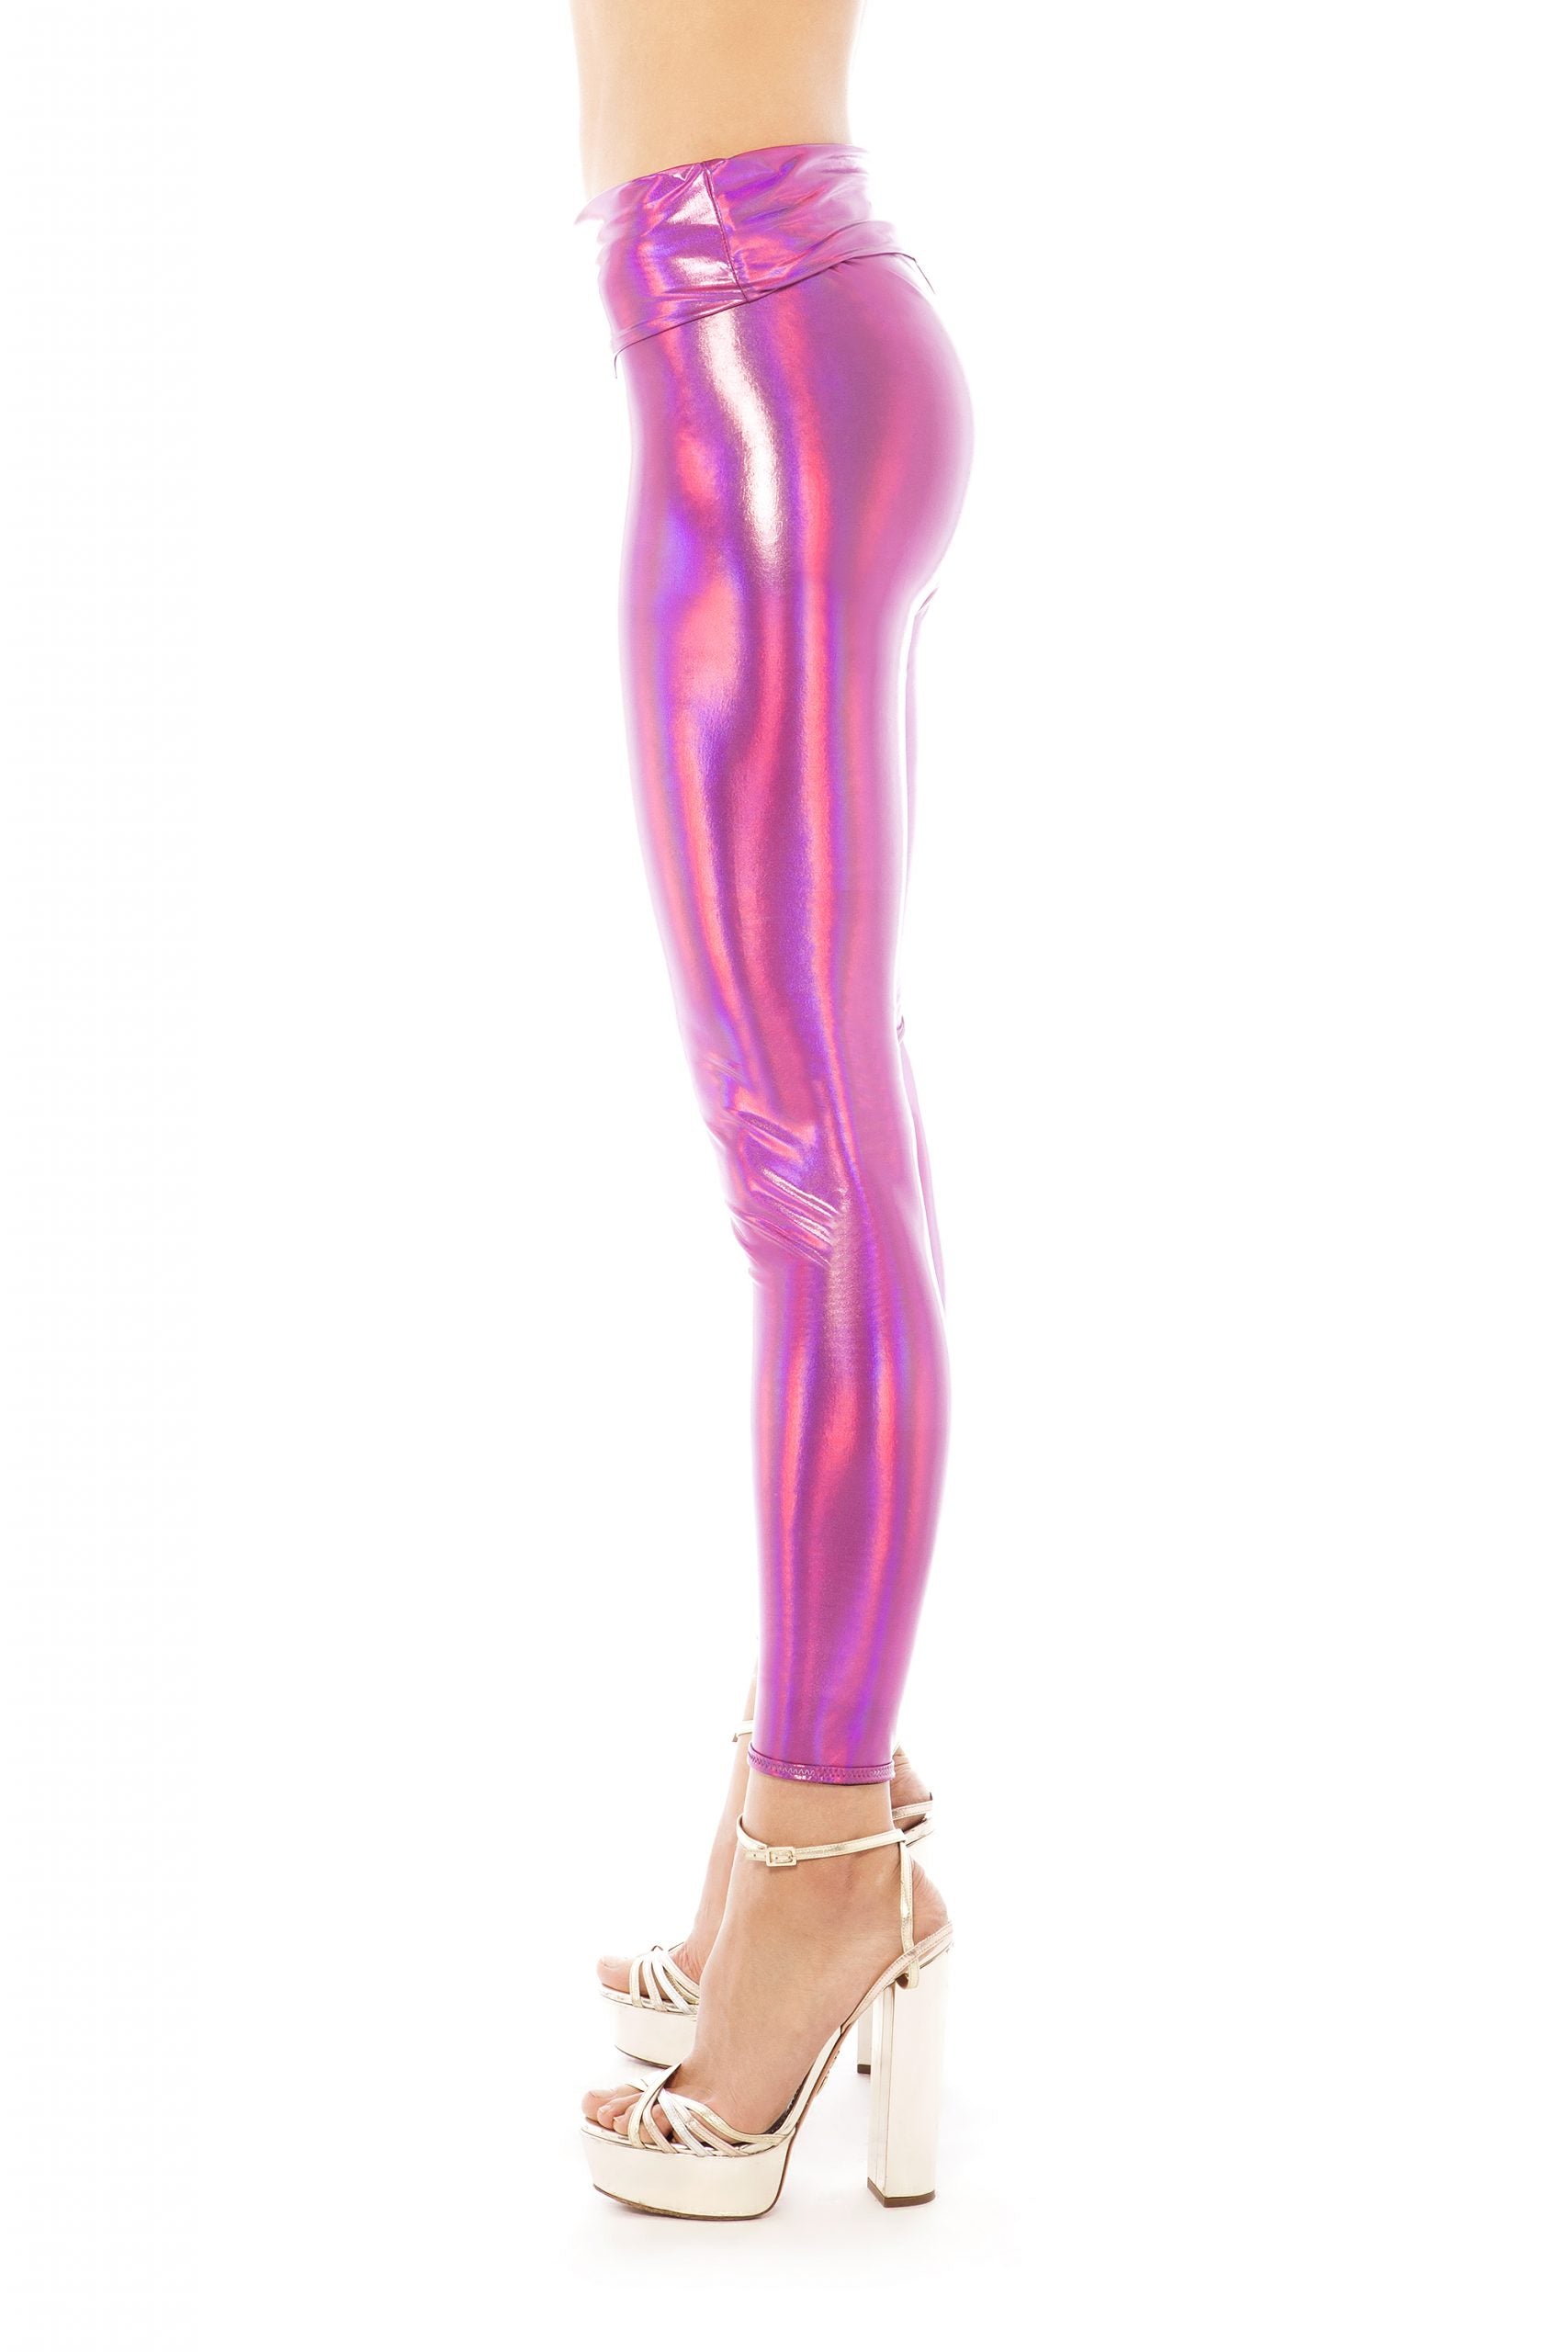 Pink Active Wear Leggings - Belted Detailed Design With Pearl Shine Fabric